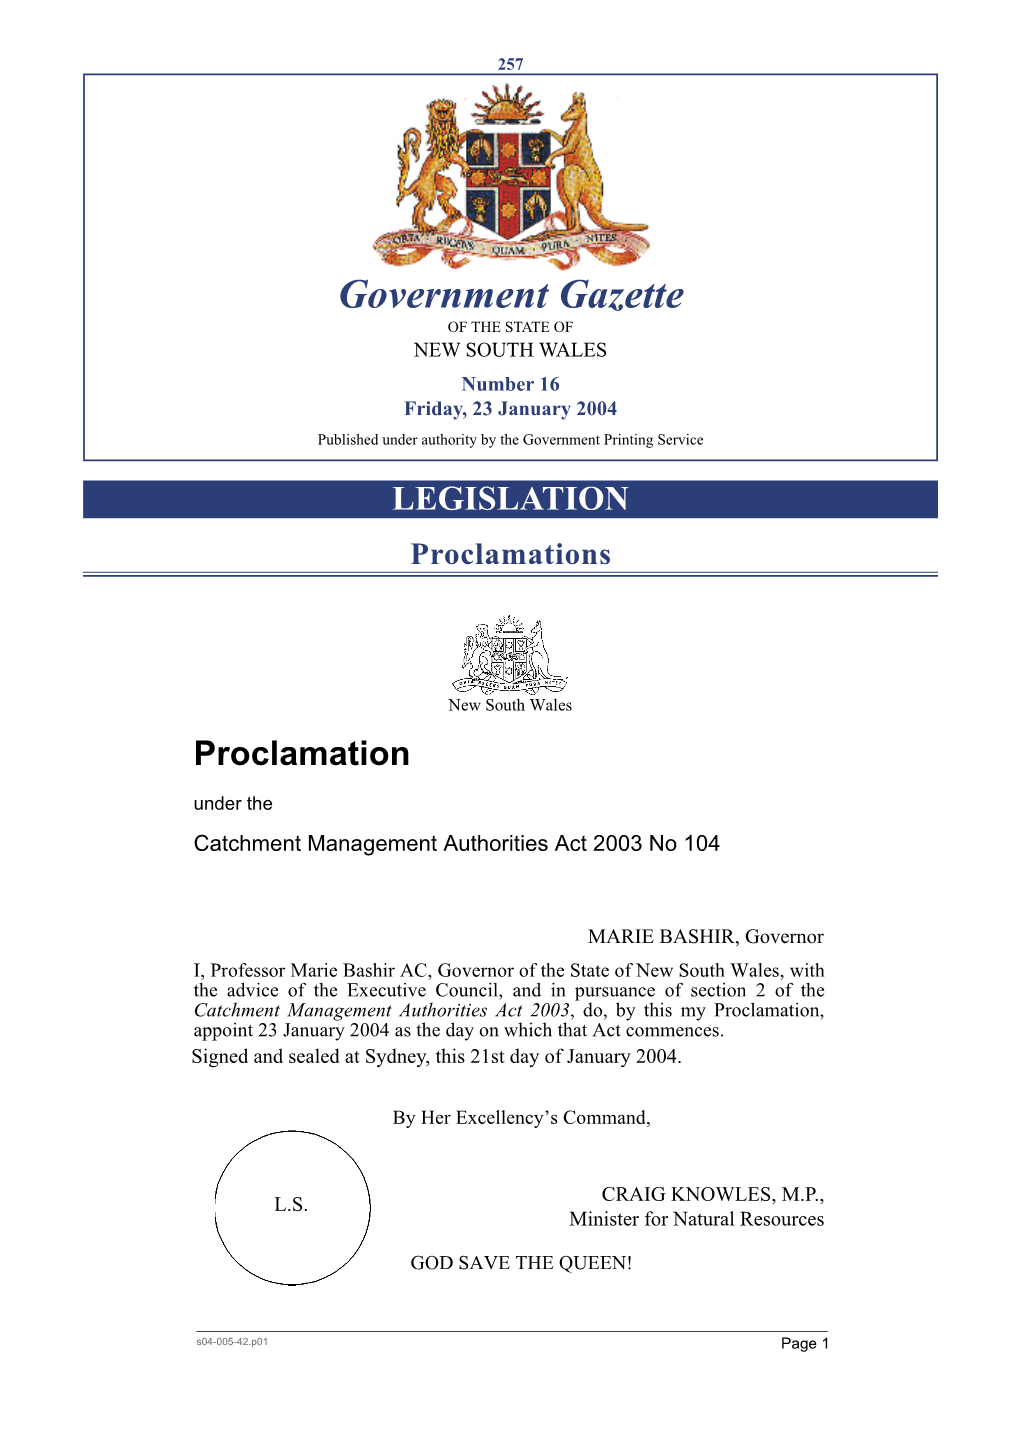 Government Gazette of the STATE of NEW SOUTH WALES